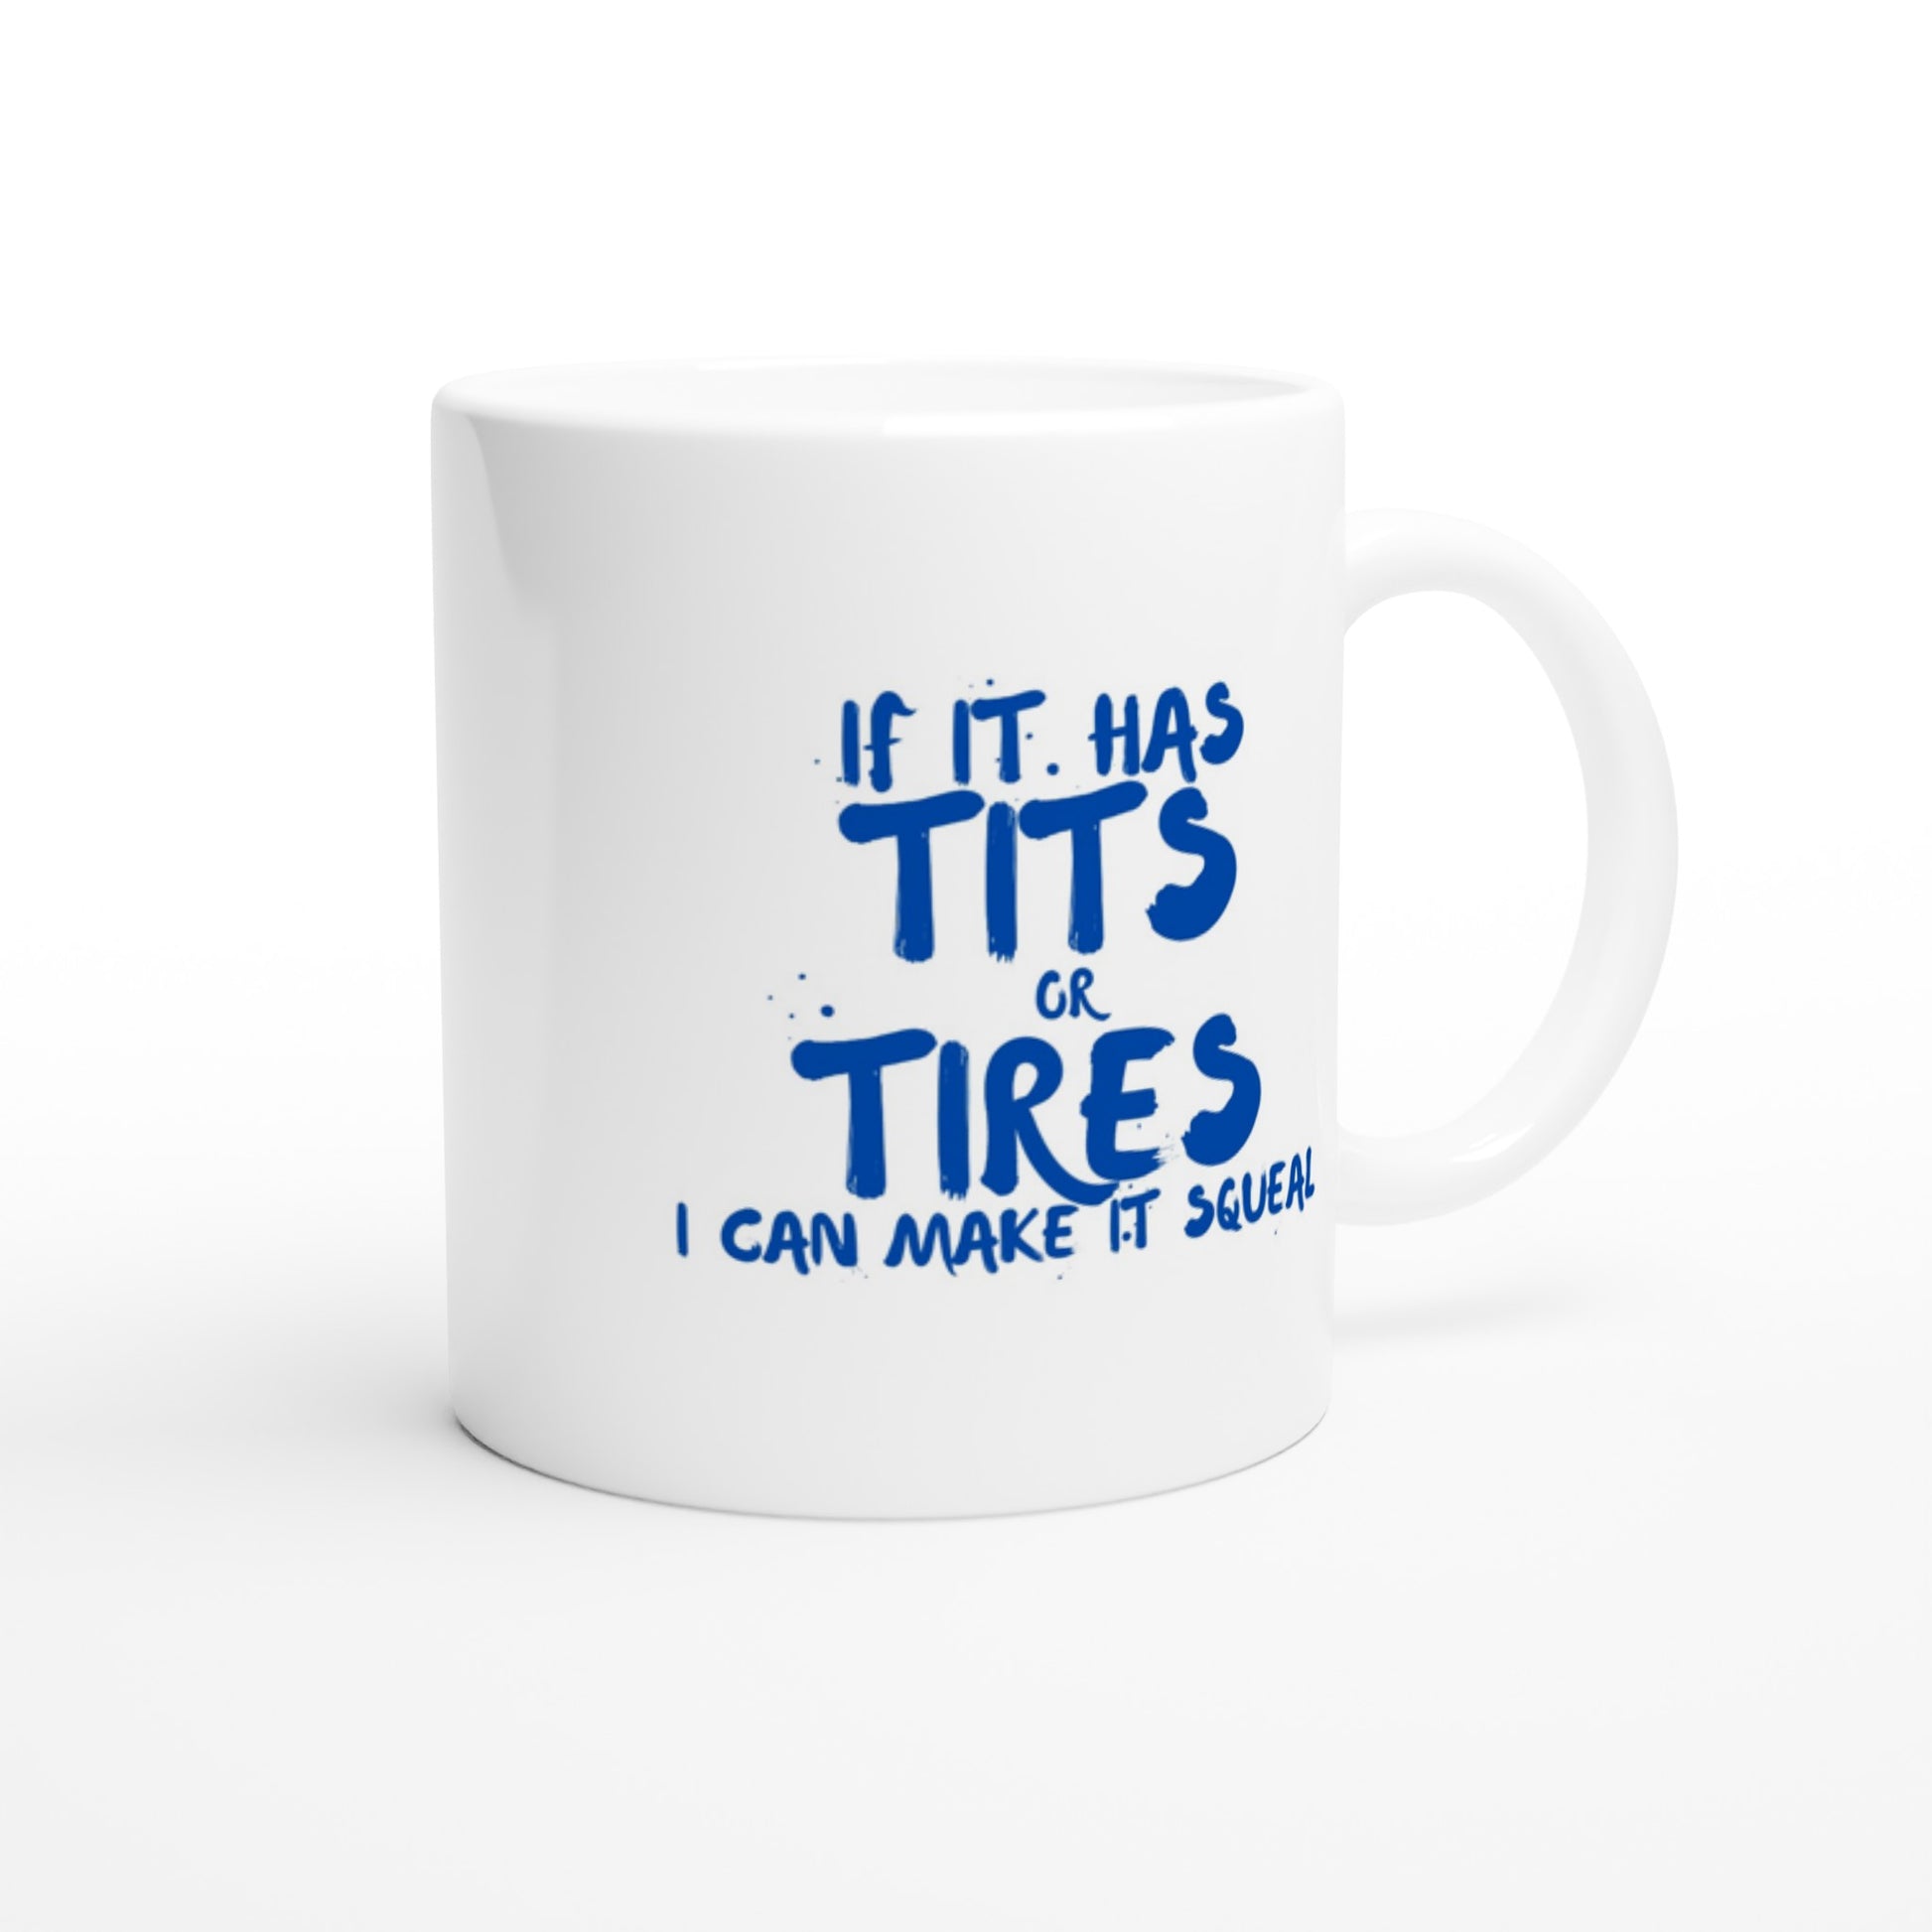 If it has Tits or Tires I can make it Squeal 11oz Mug - Mister Snarky's